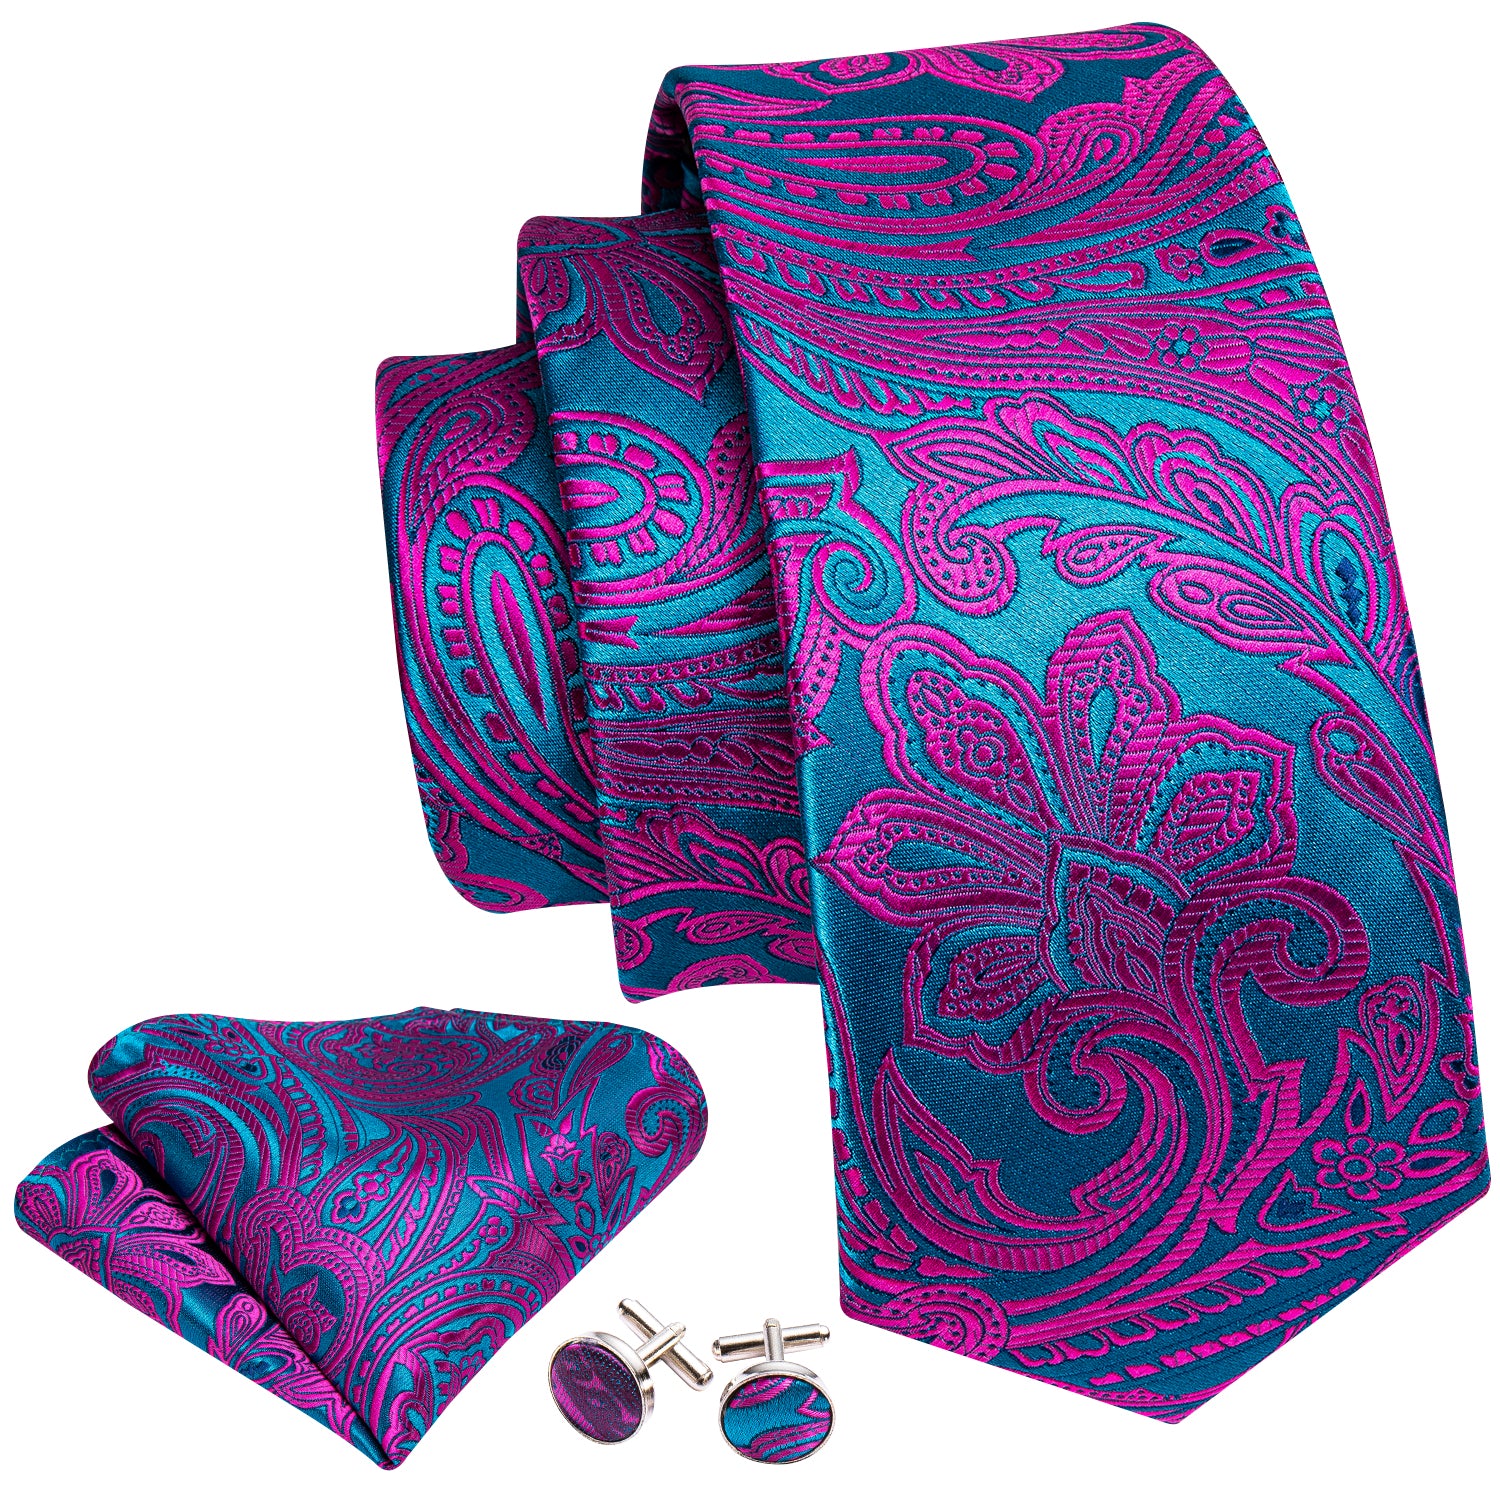 Barry.wang Blue Tie Red Paisley Tie Pocket Square Cufflinks Gift Box Set